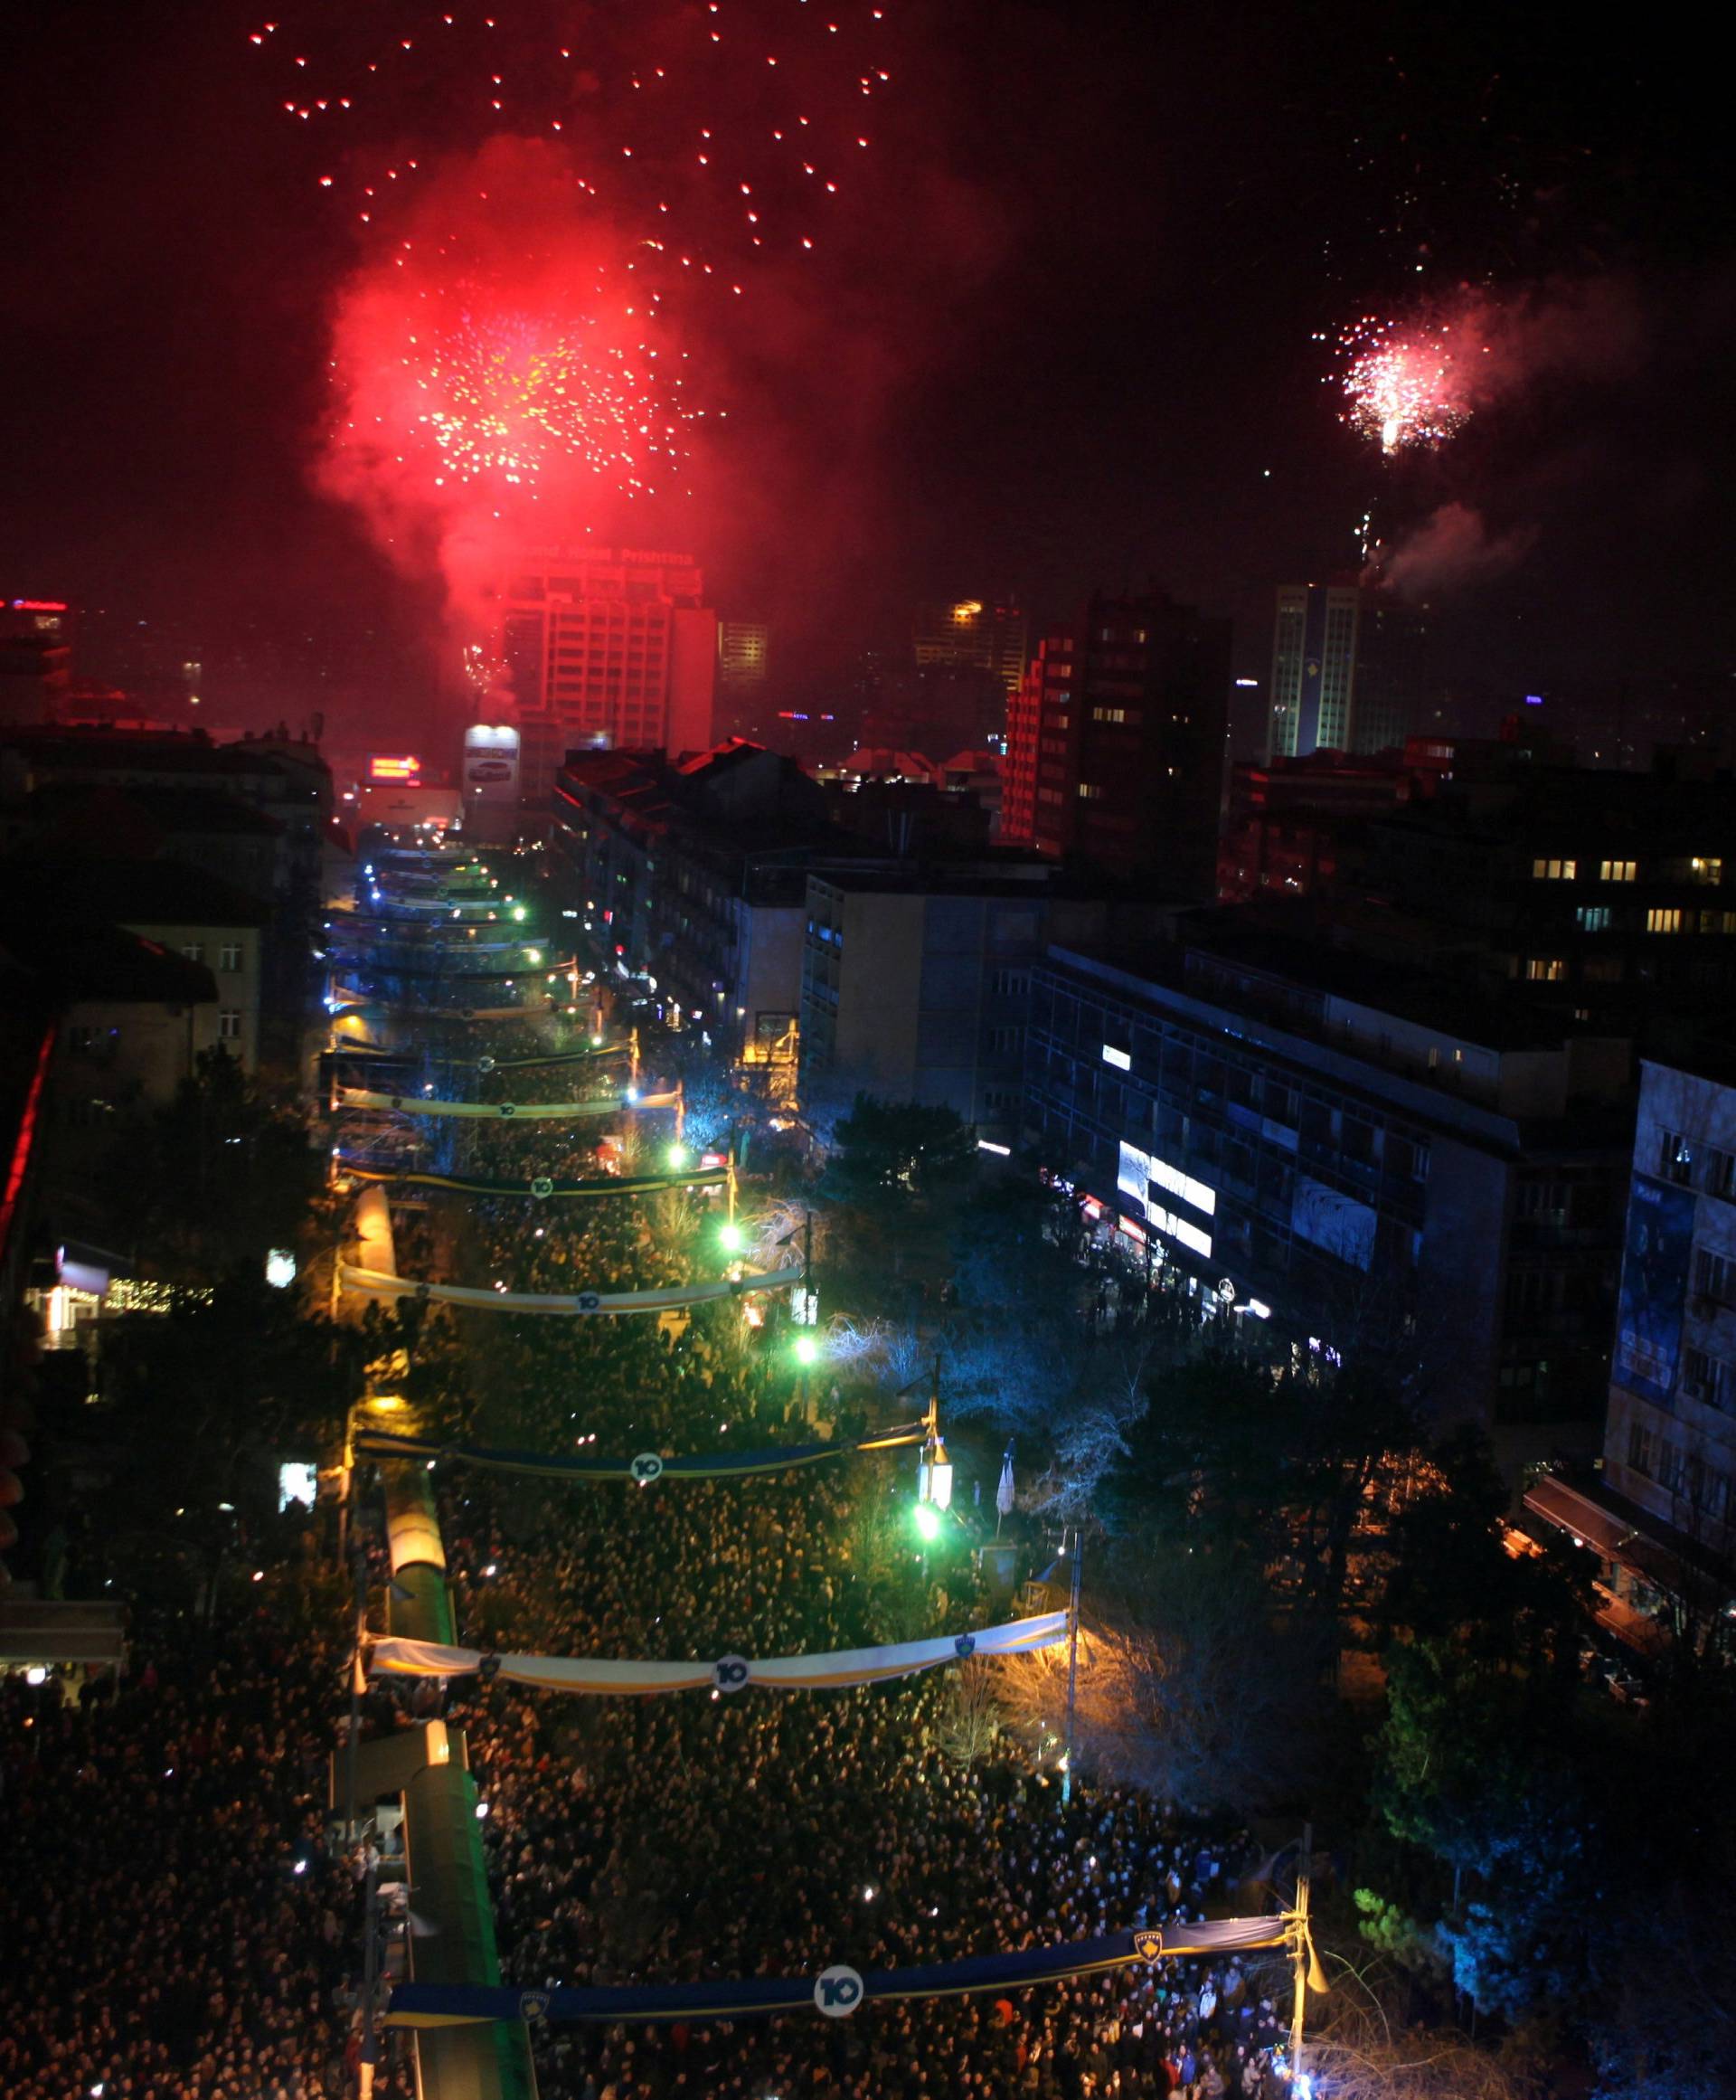 General view of Rita Ora's concert during celebration of the 10th anniversary of Kosovo's independence in Pristina